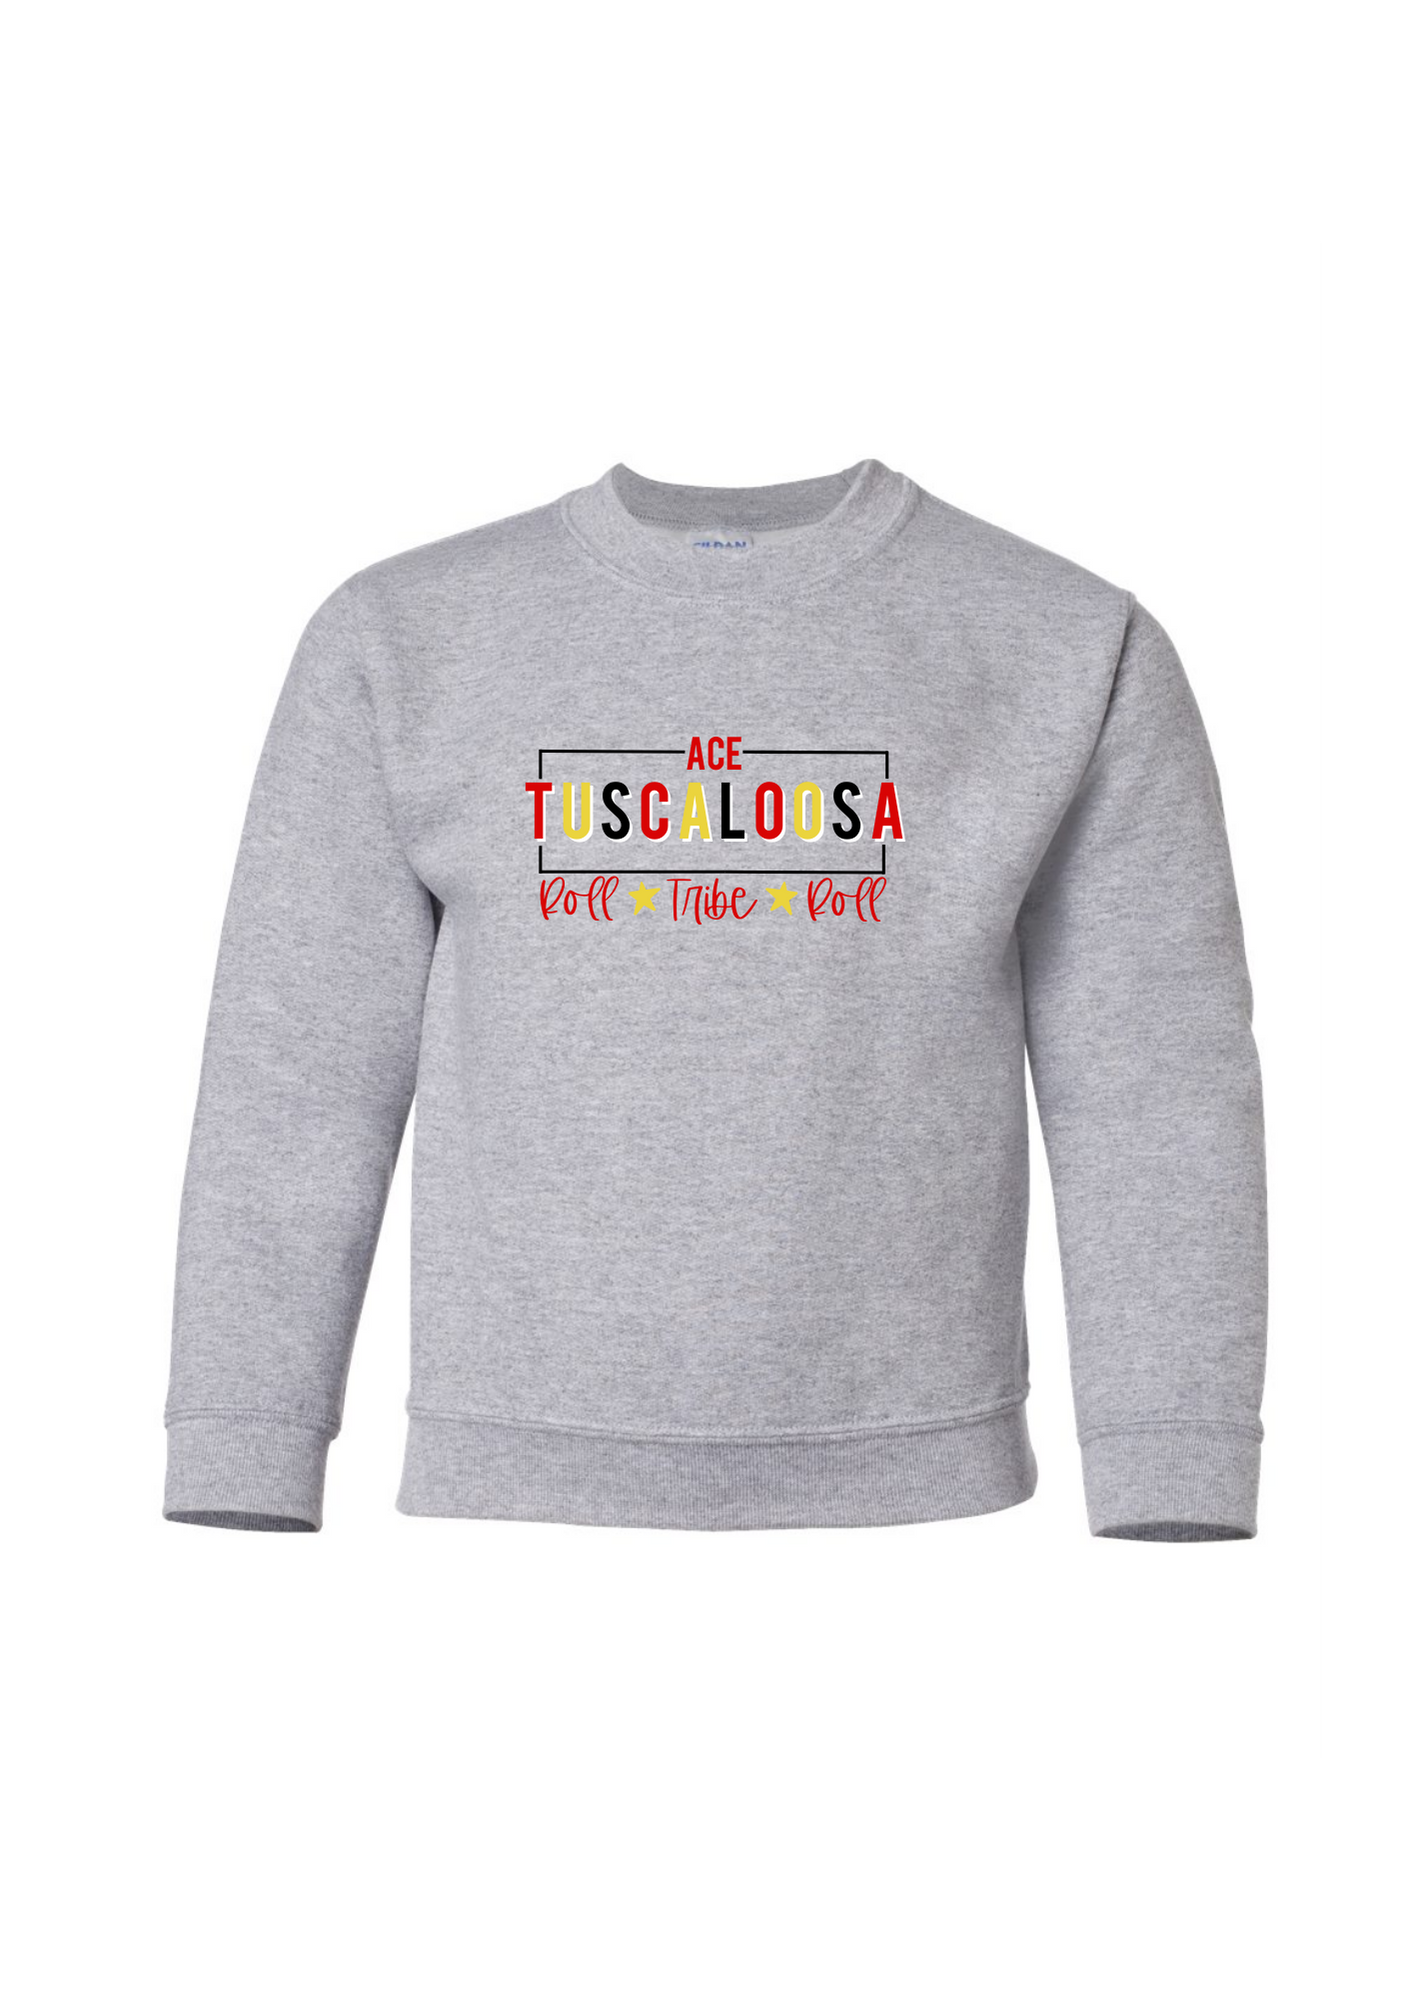 ACE Tuscaloosa | Pullover | Kids-Sister Shirts-Sister Shirts, Cute & Custom Tees for Mama & Littles in Trussville, Alabama.